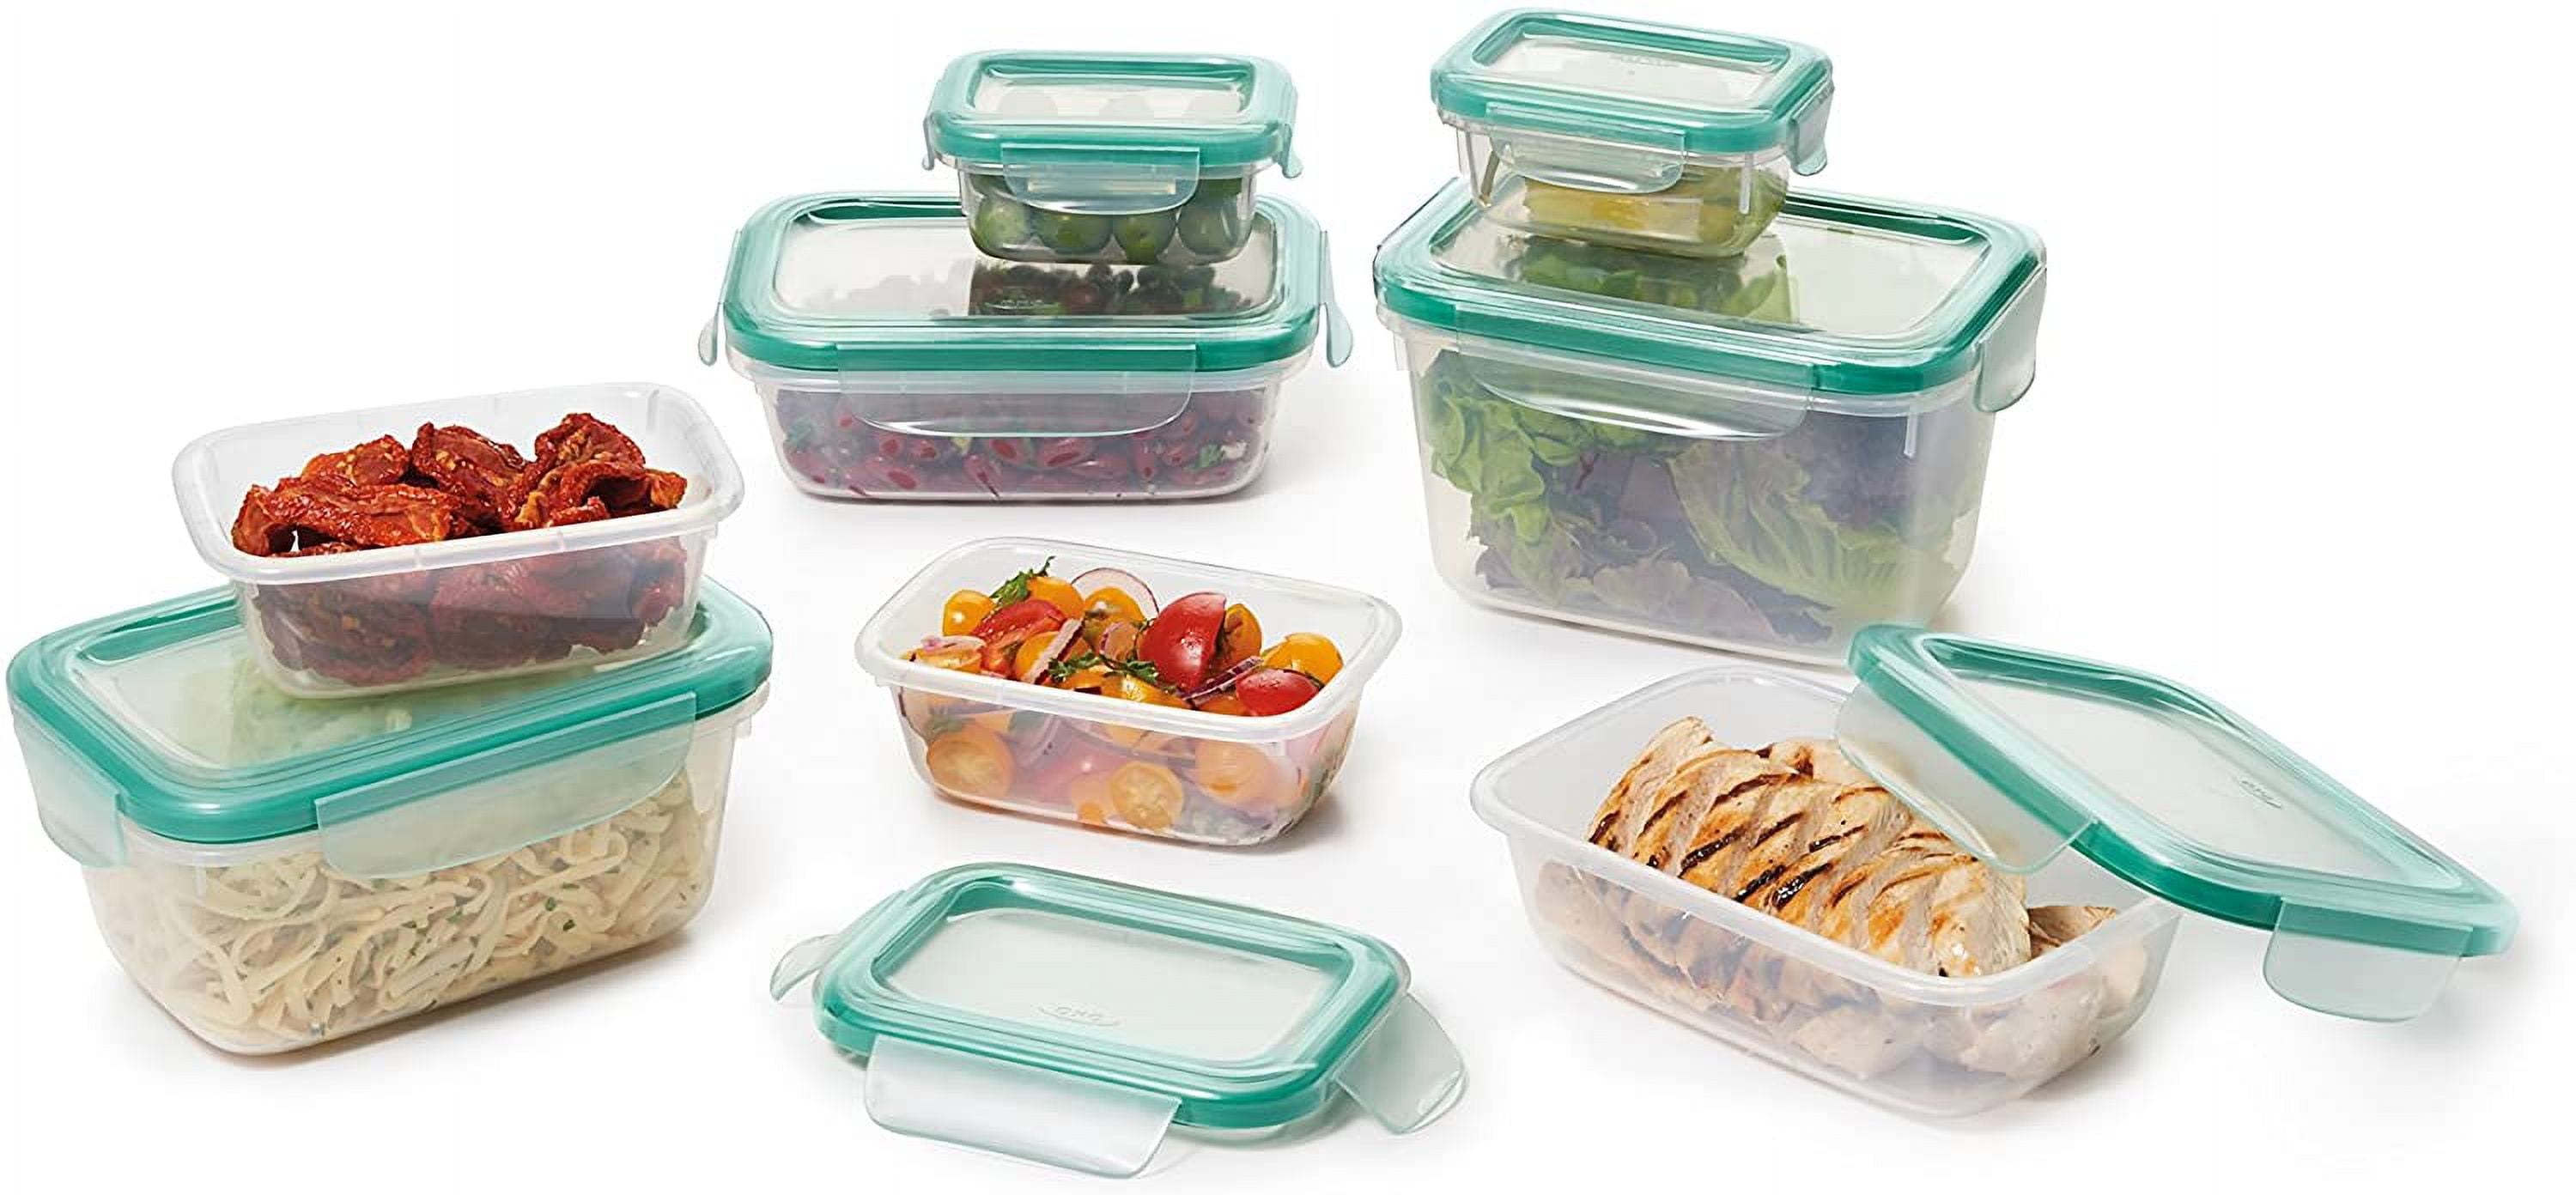 Good Grips 1.6 Cup Smart Seal Glass Food Storage Container - Rectangle | OXO